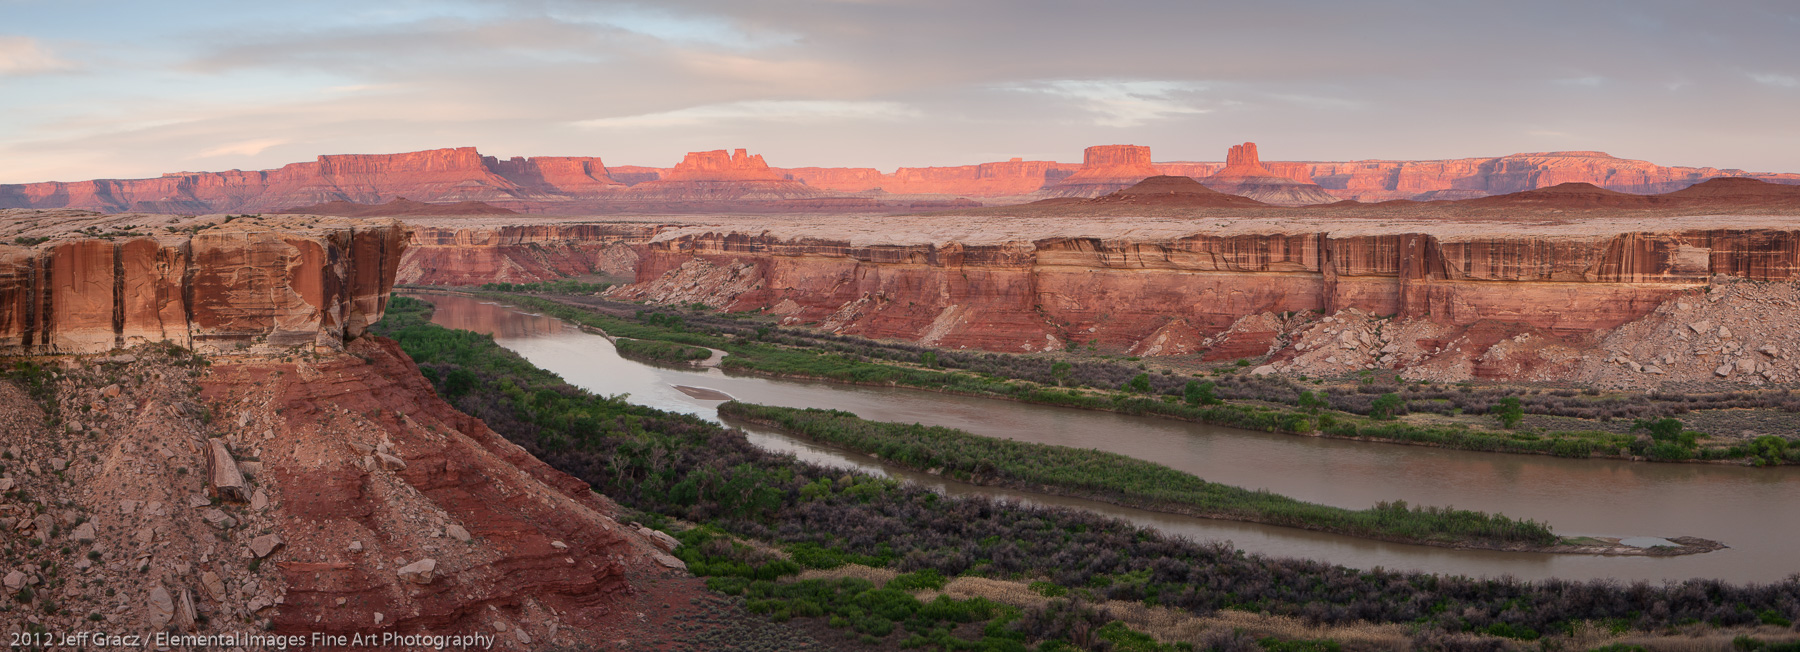 The Green River Through Canyonlands | Canyonlands National Park | UT | USA - © 2012 Jeff Gracz / Elemental Images Fine Art Photography - All Rights Reserved Worldwide